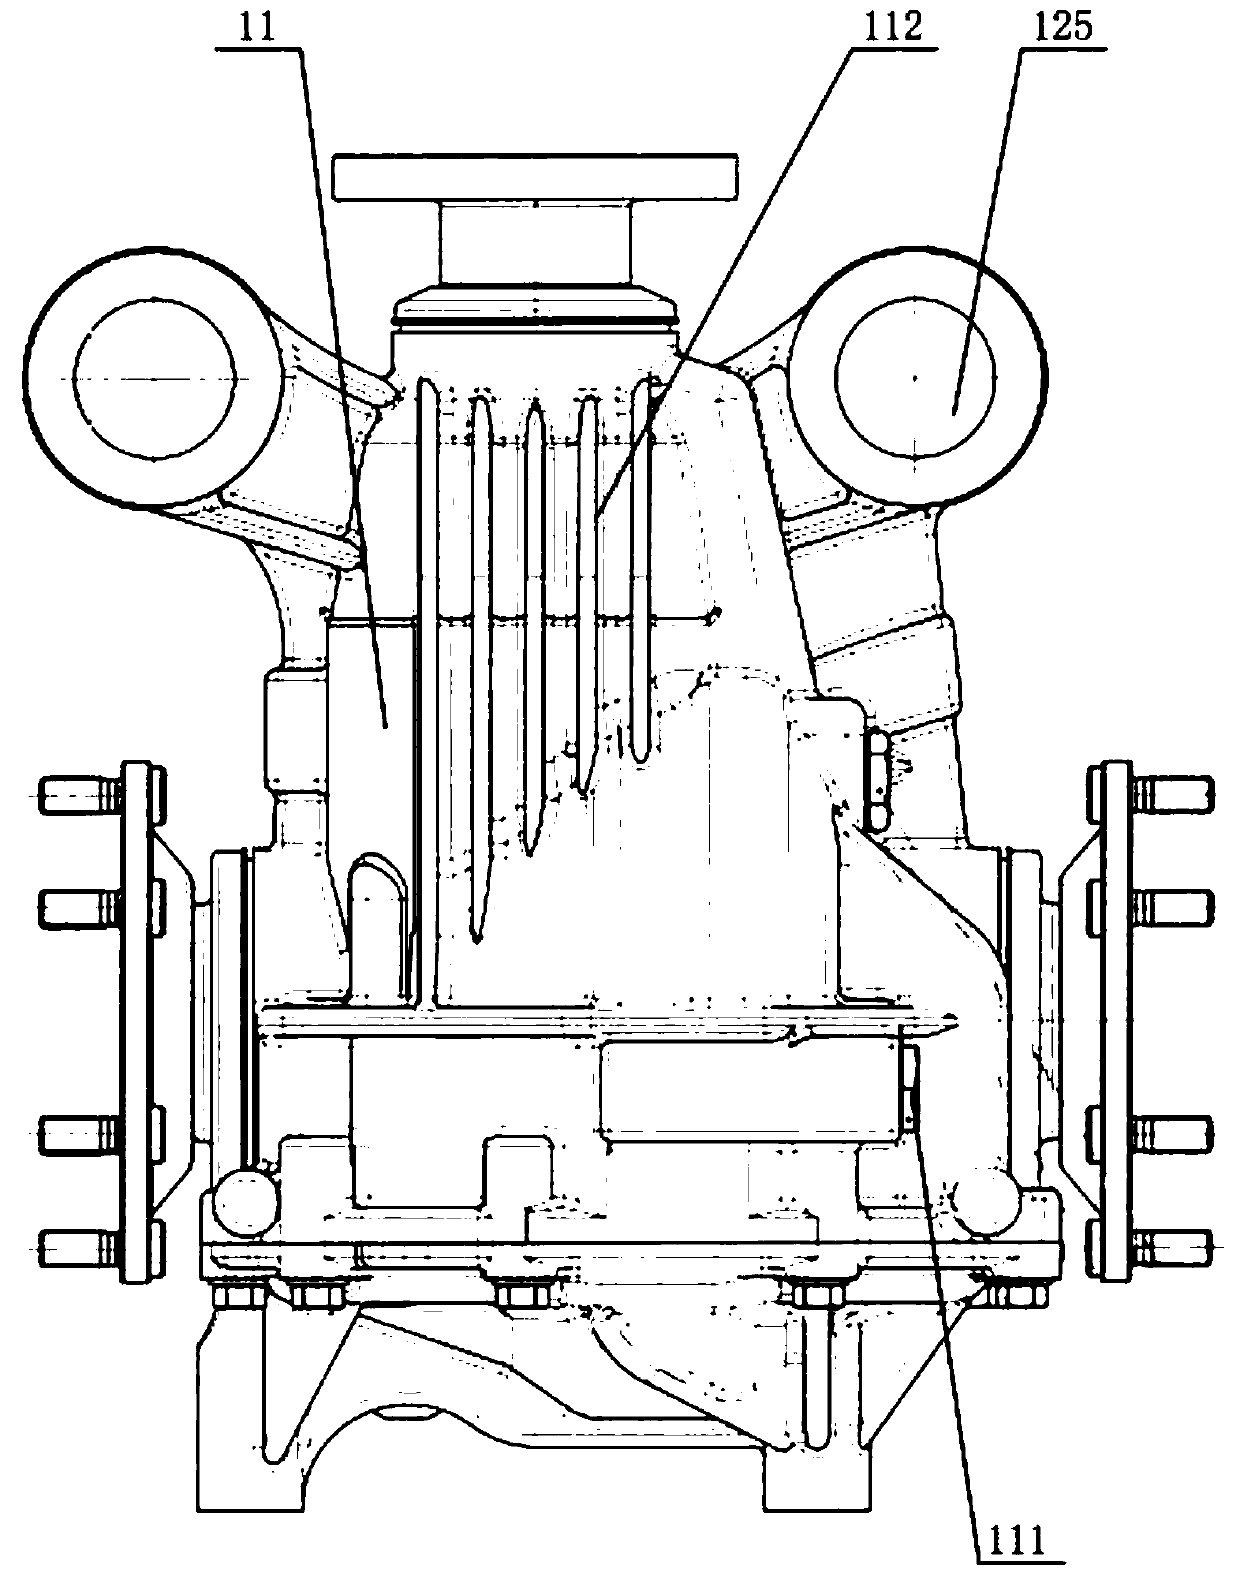 Reducer assembly and vehicle